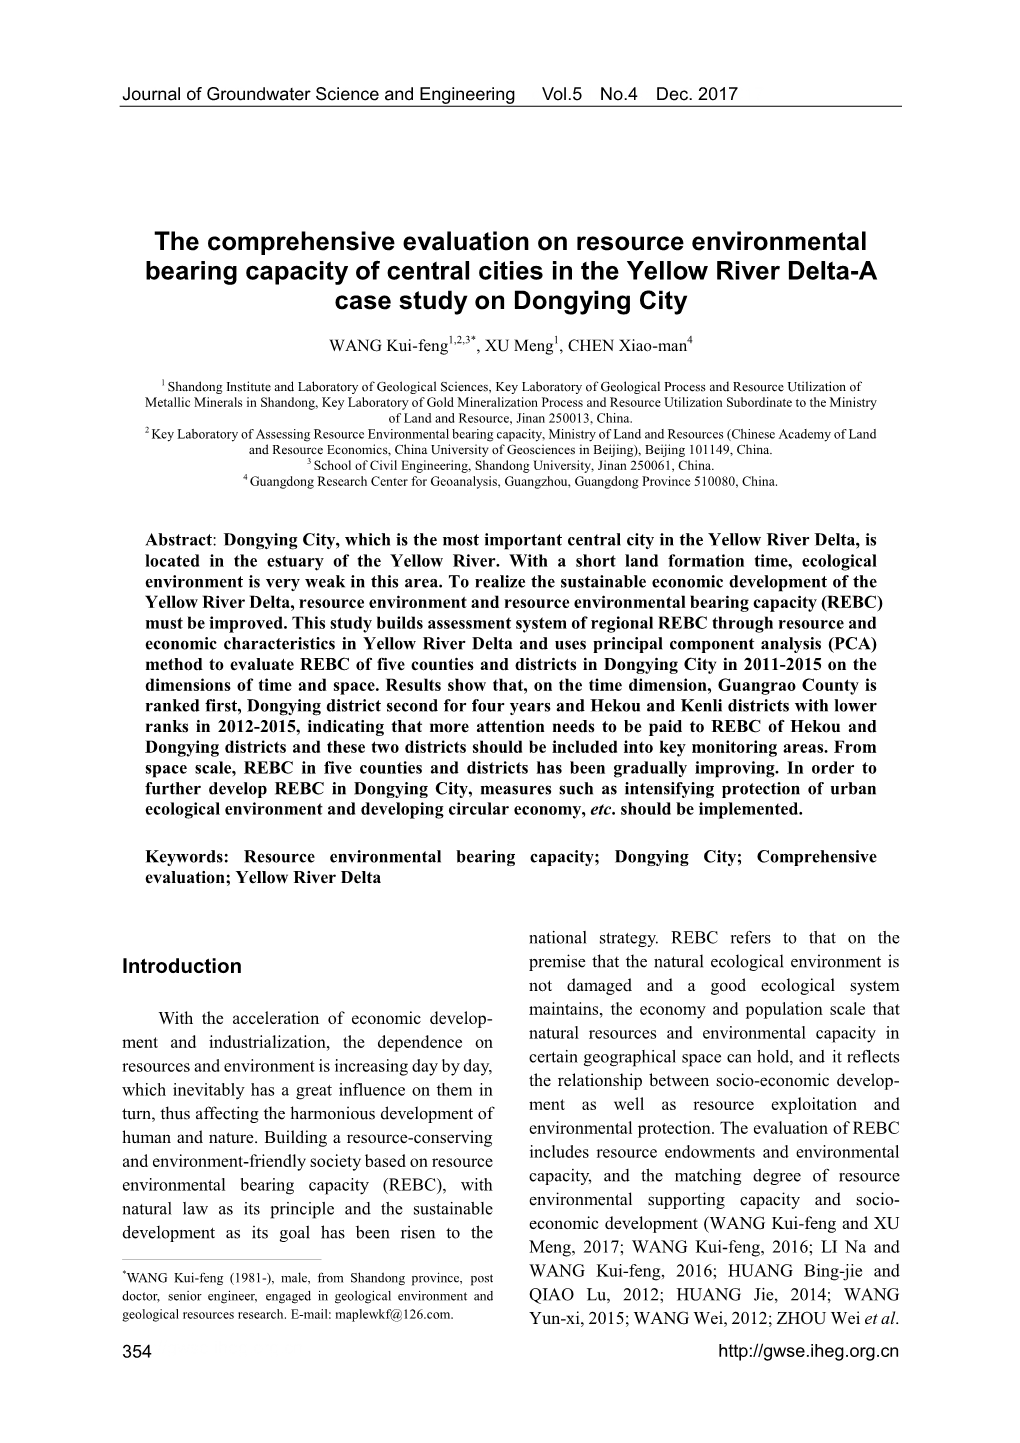 The Comprehensive Evaluation on Resource Environmental Bearing Capacity of Central Cities in the Yellow River Delta-A Case Study on Dongying City